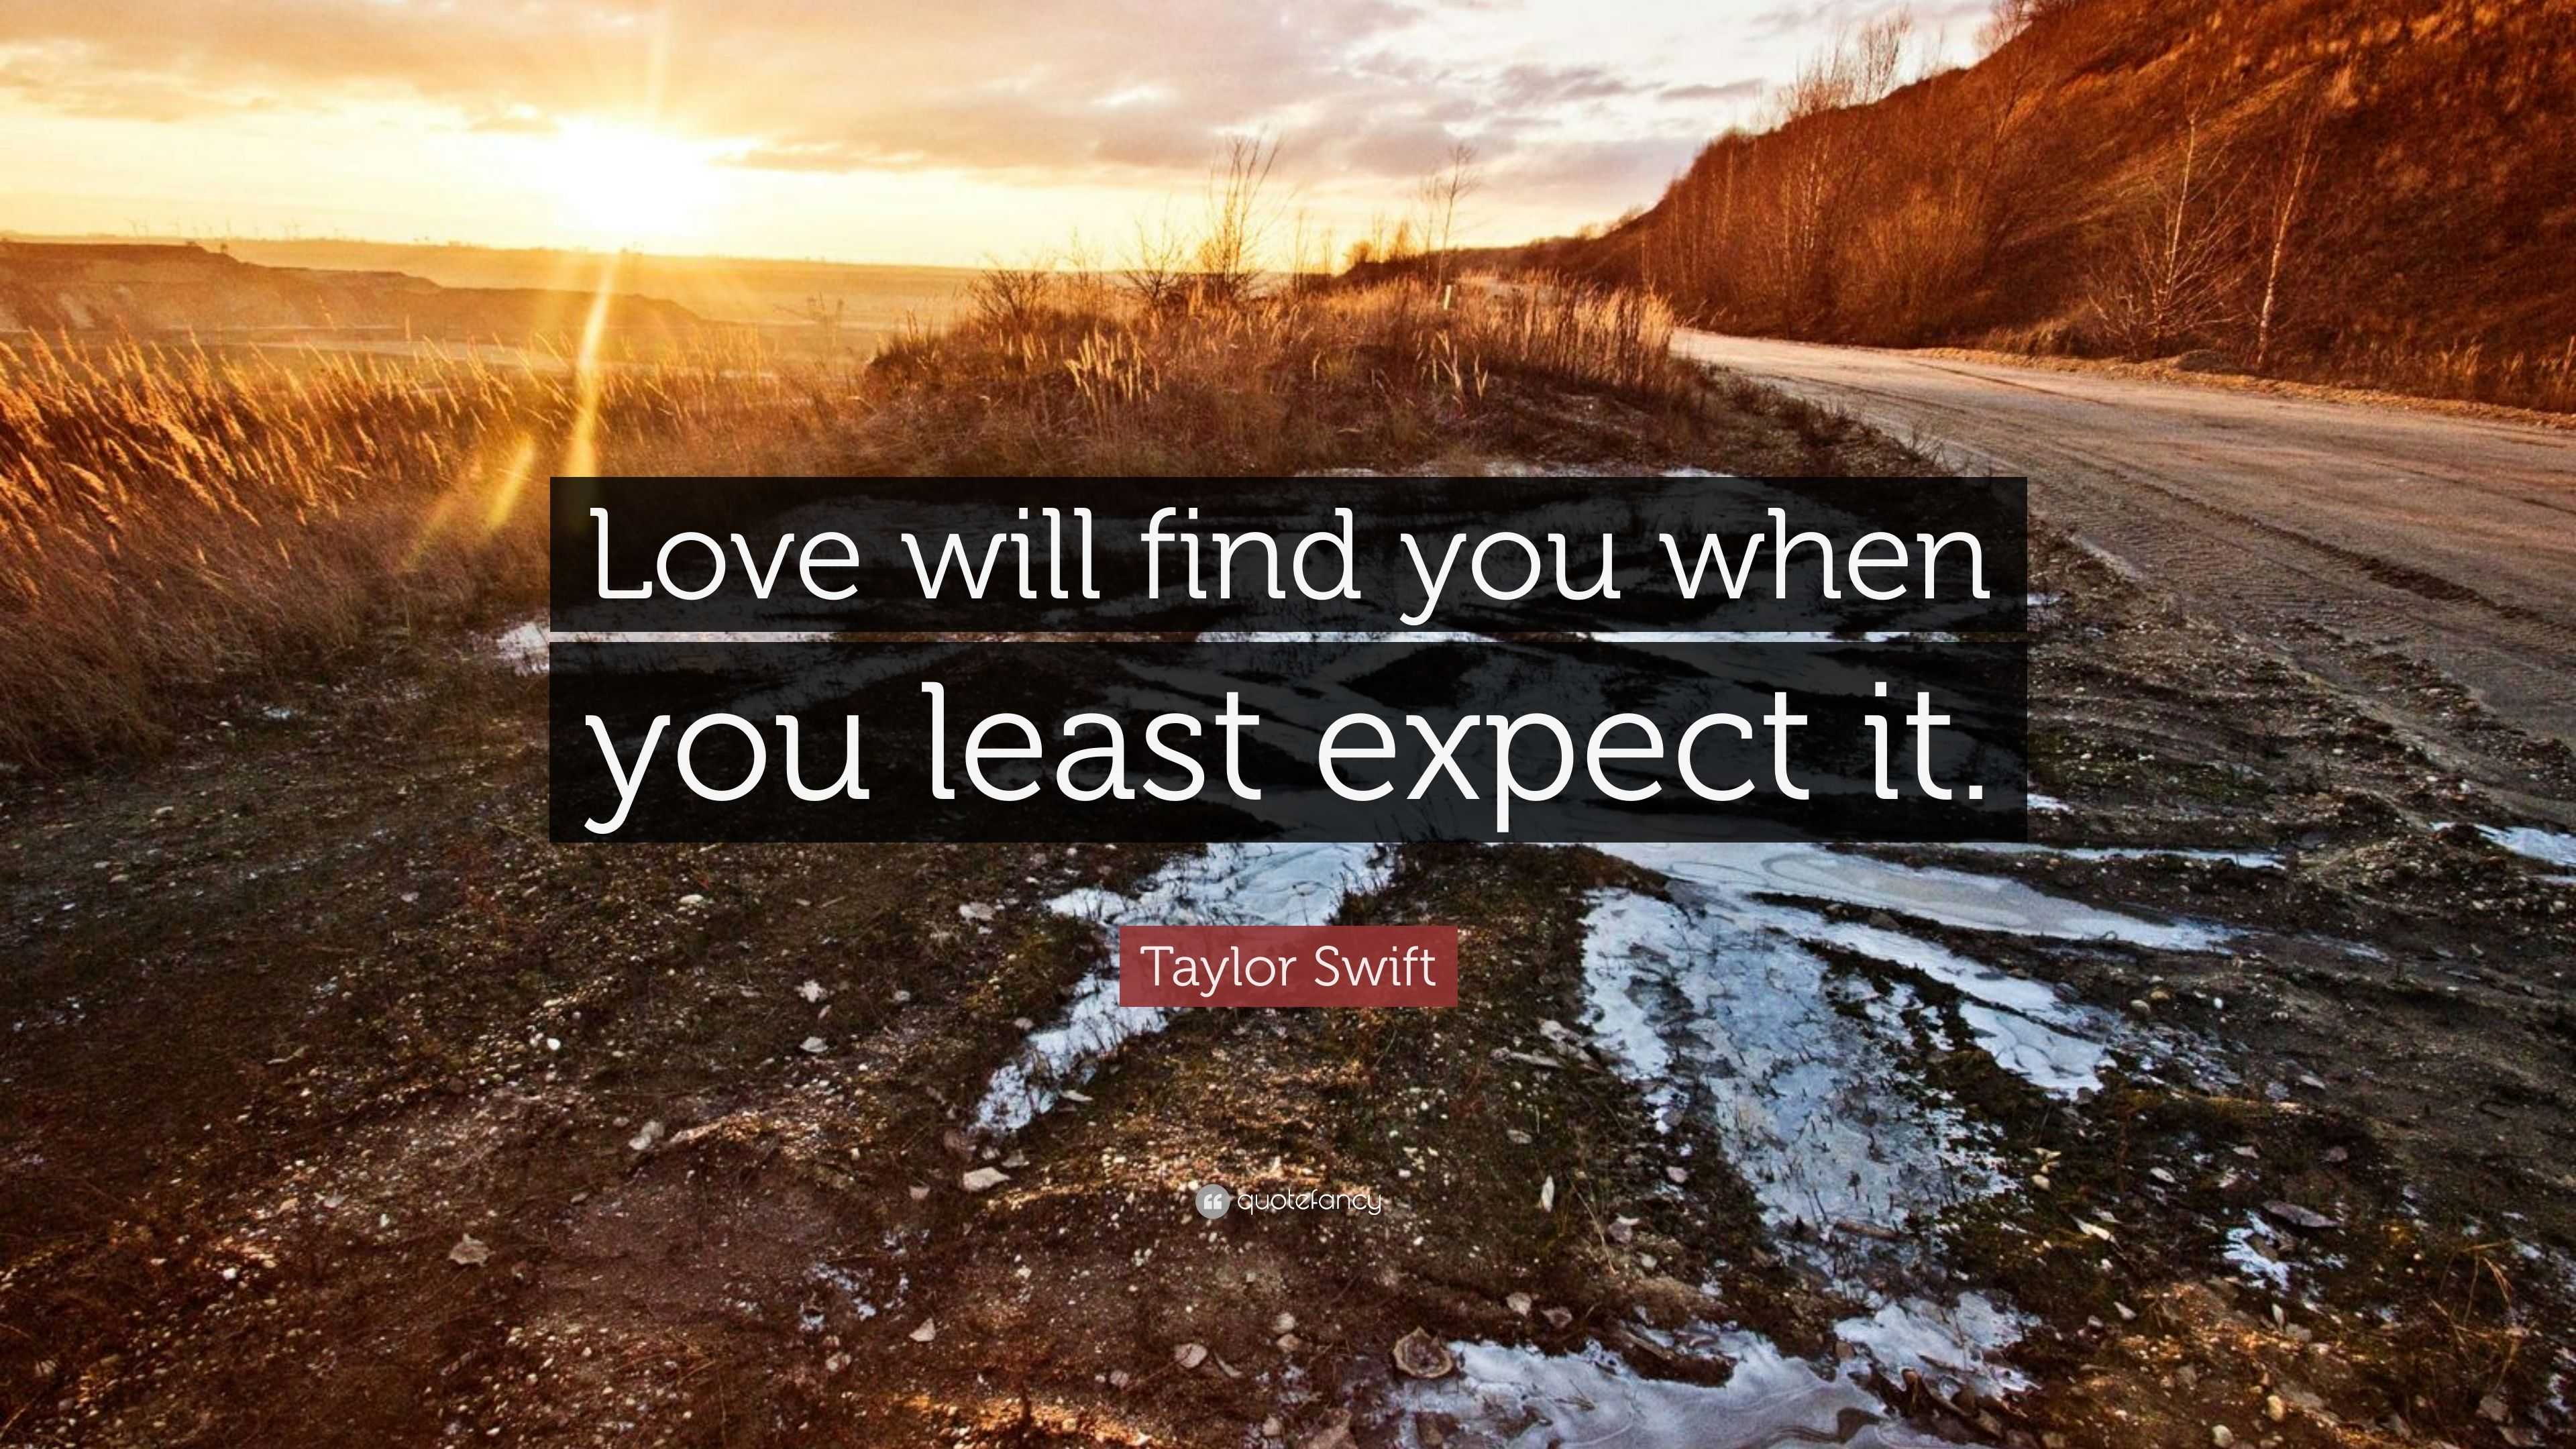 Taylor Swift Quote “Love will find you when you least expect it ”